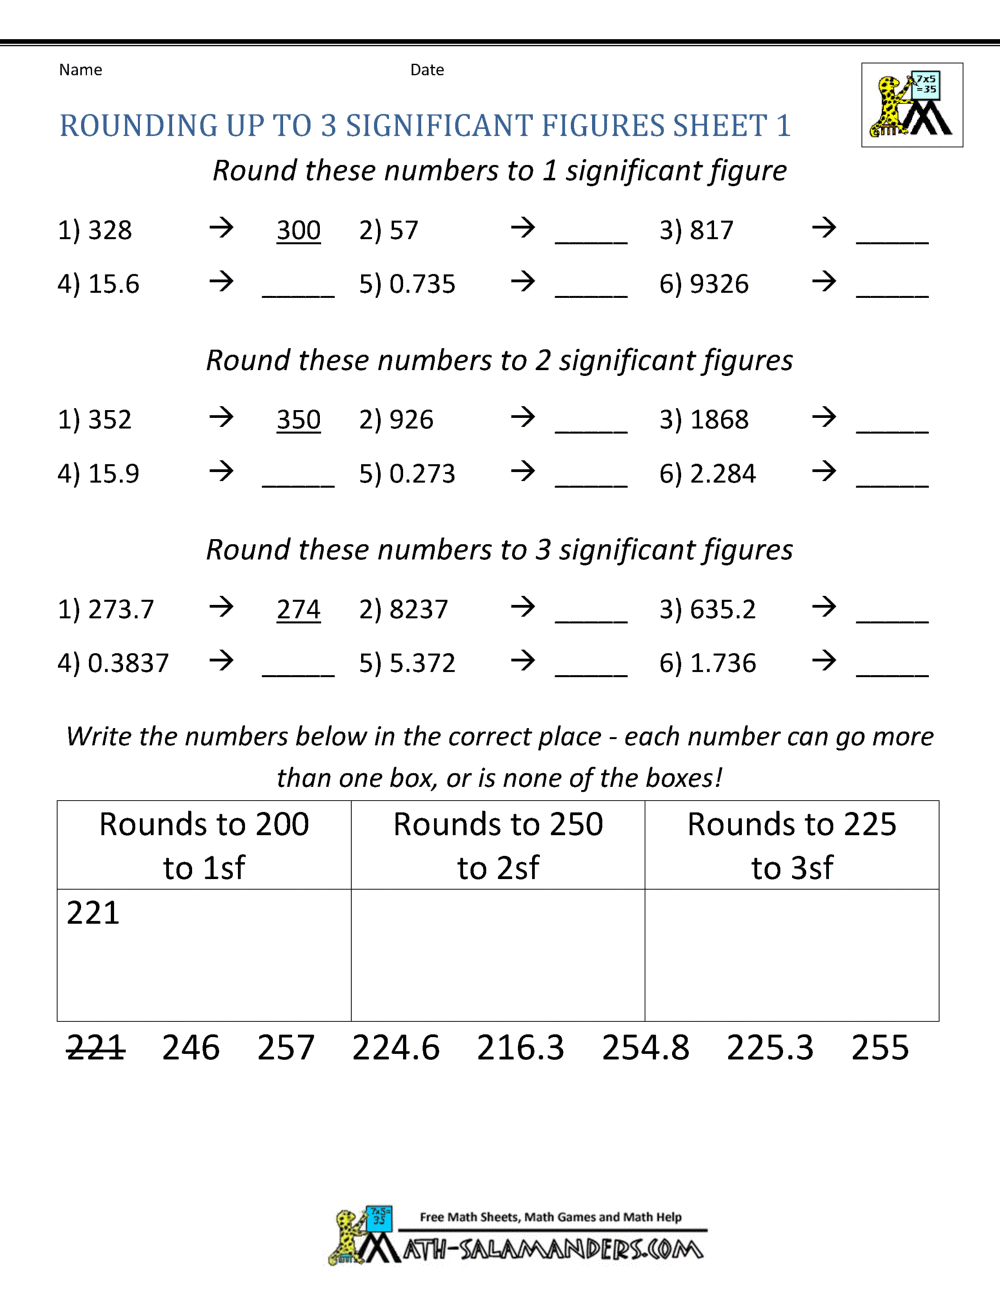 Rounding Significant Figures With Significant Figures Worksheet Answers